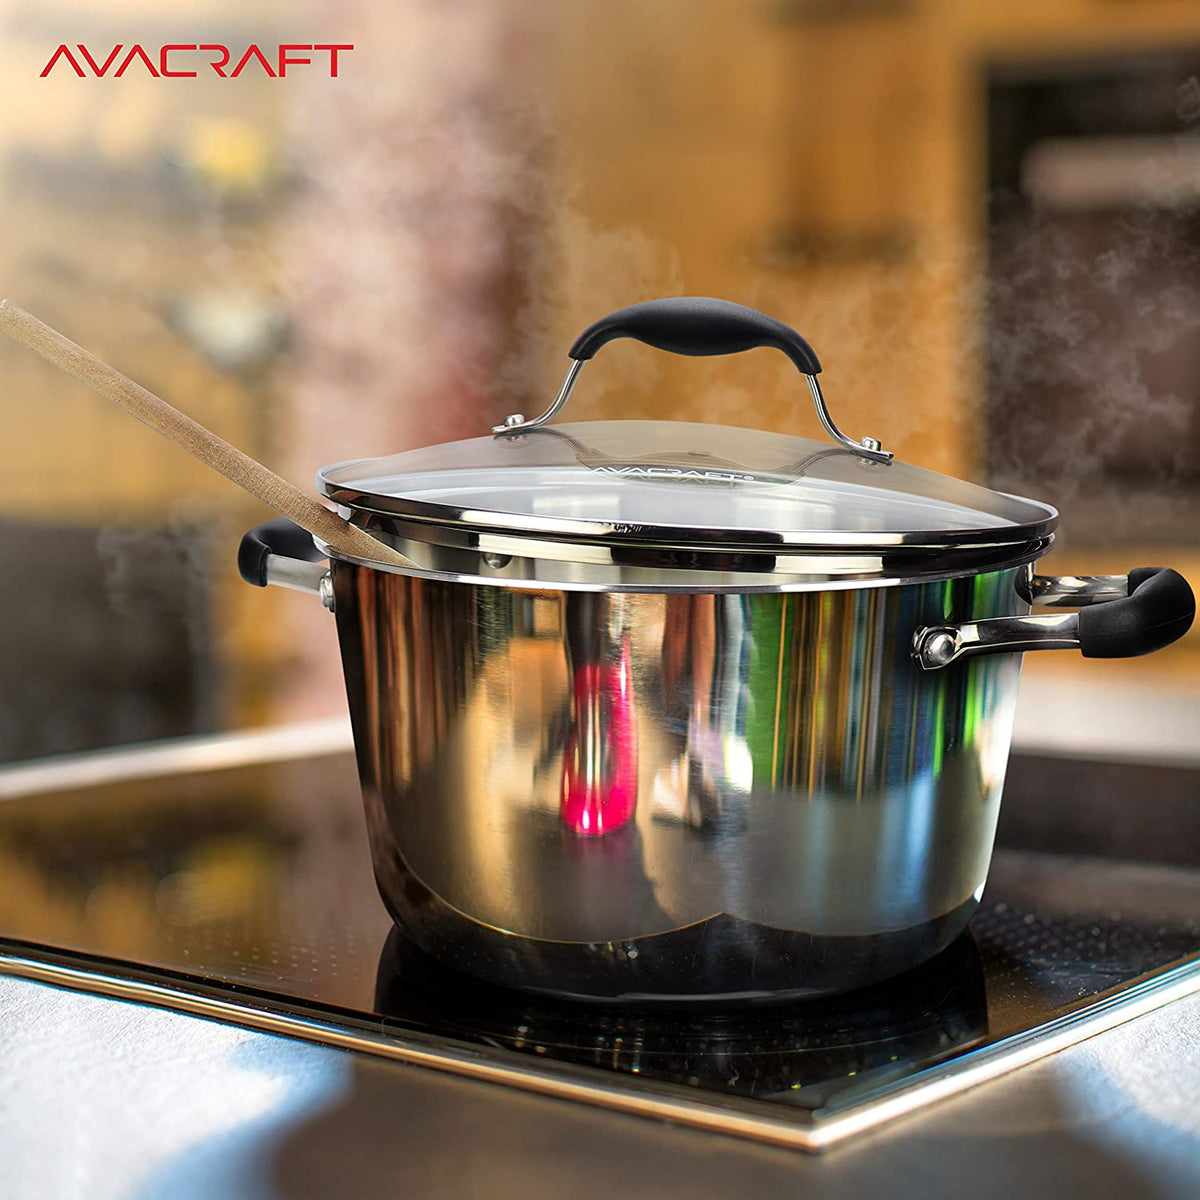 AVACRAFT Stainless Steel Saucepan with Glass Strainer Lid, Two Side Sp